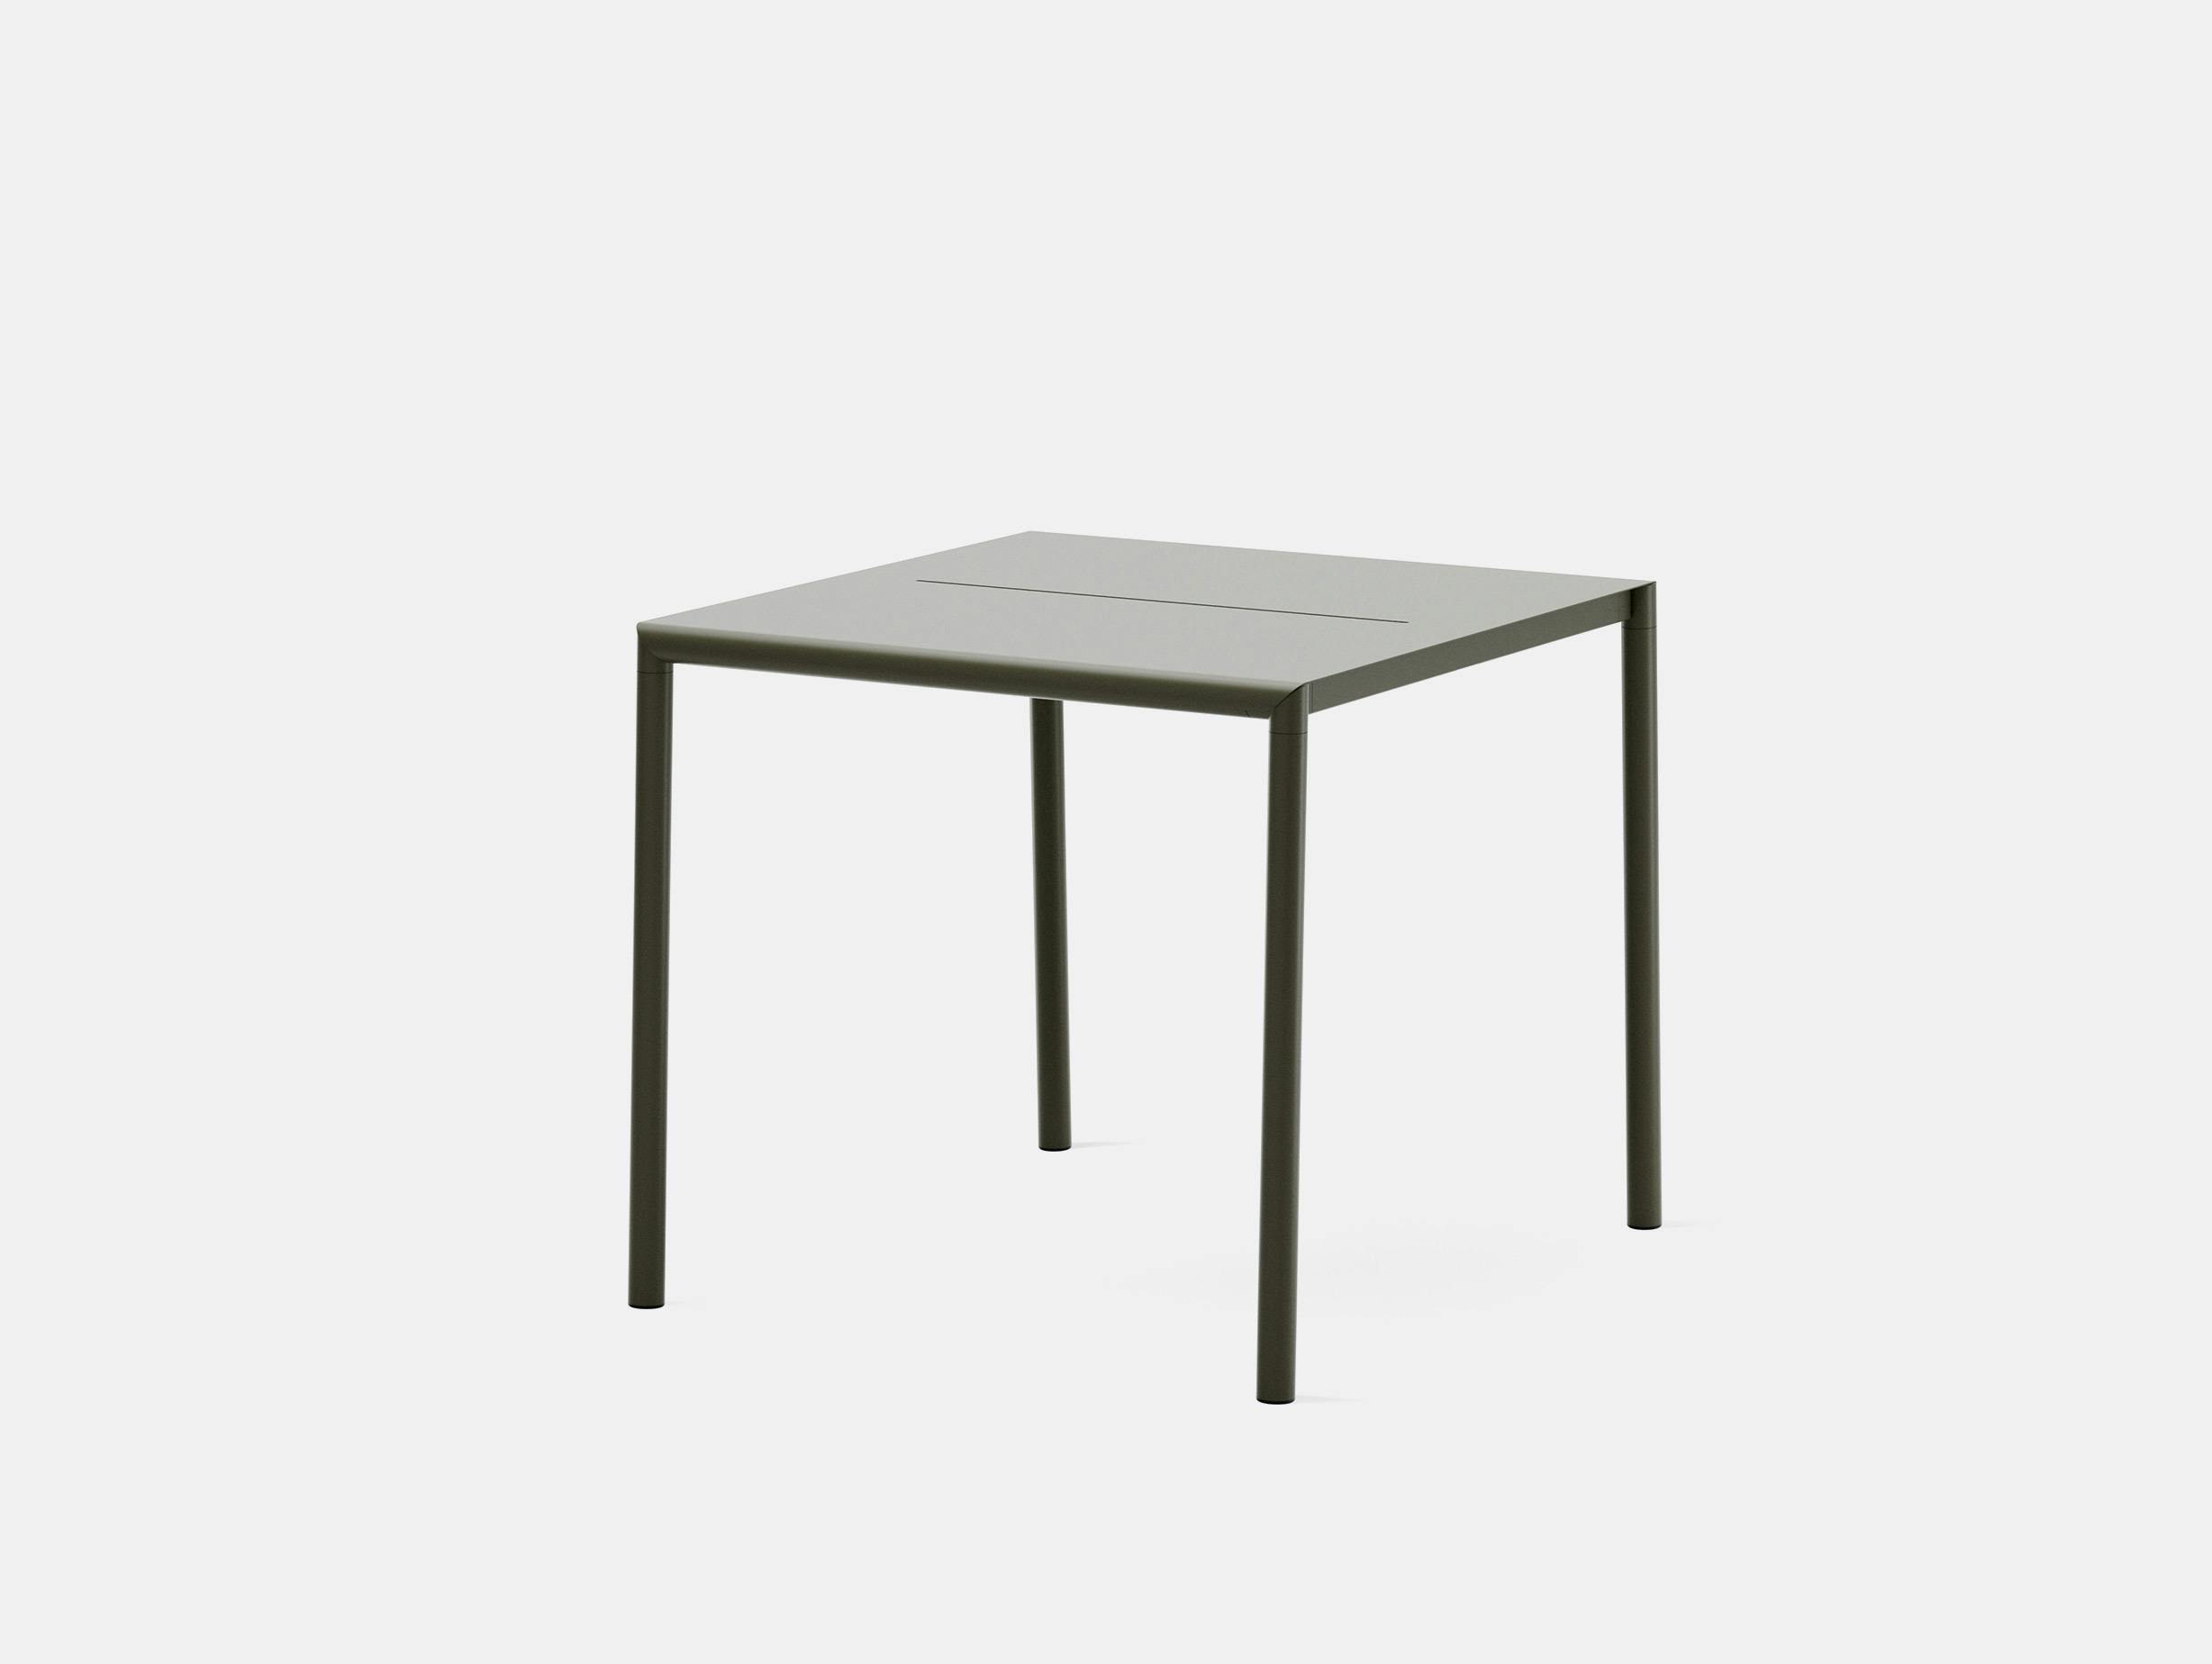 New works hannes fritz may table square dark green